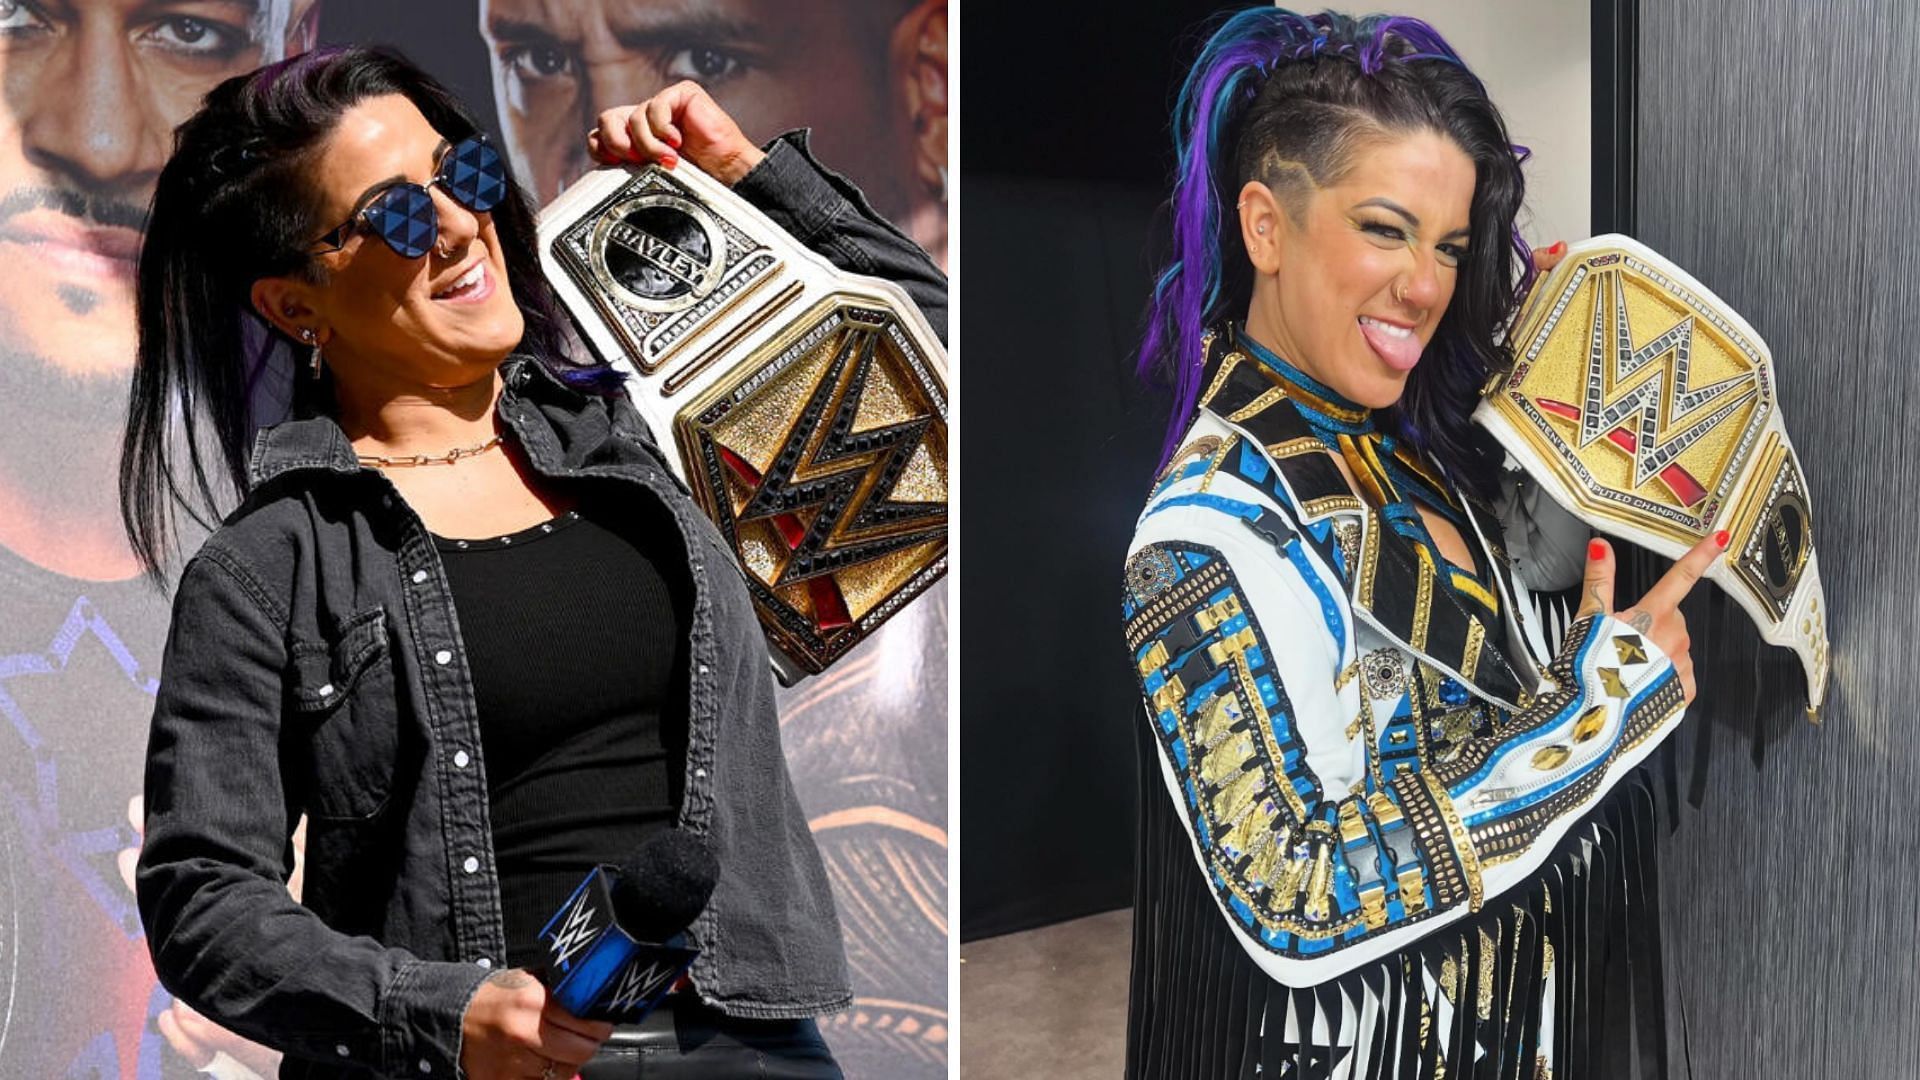 The Role Model retained her title at Backlash.